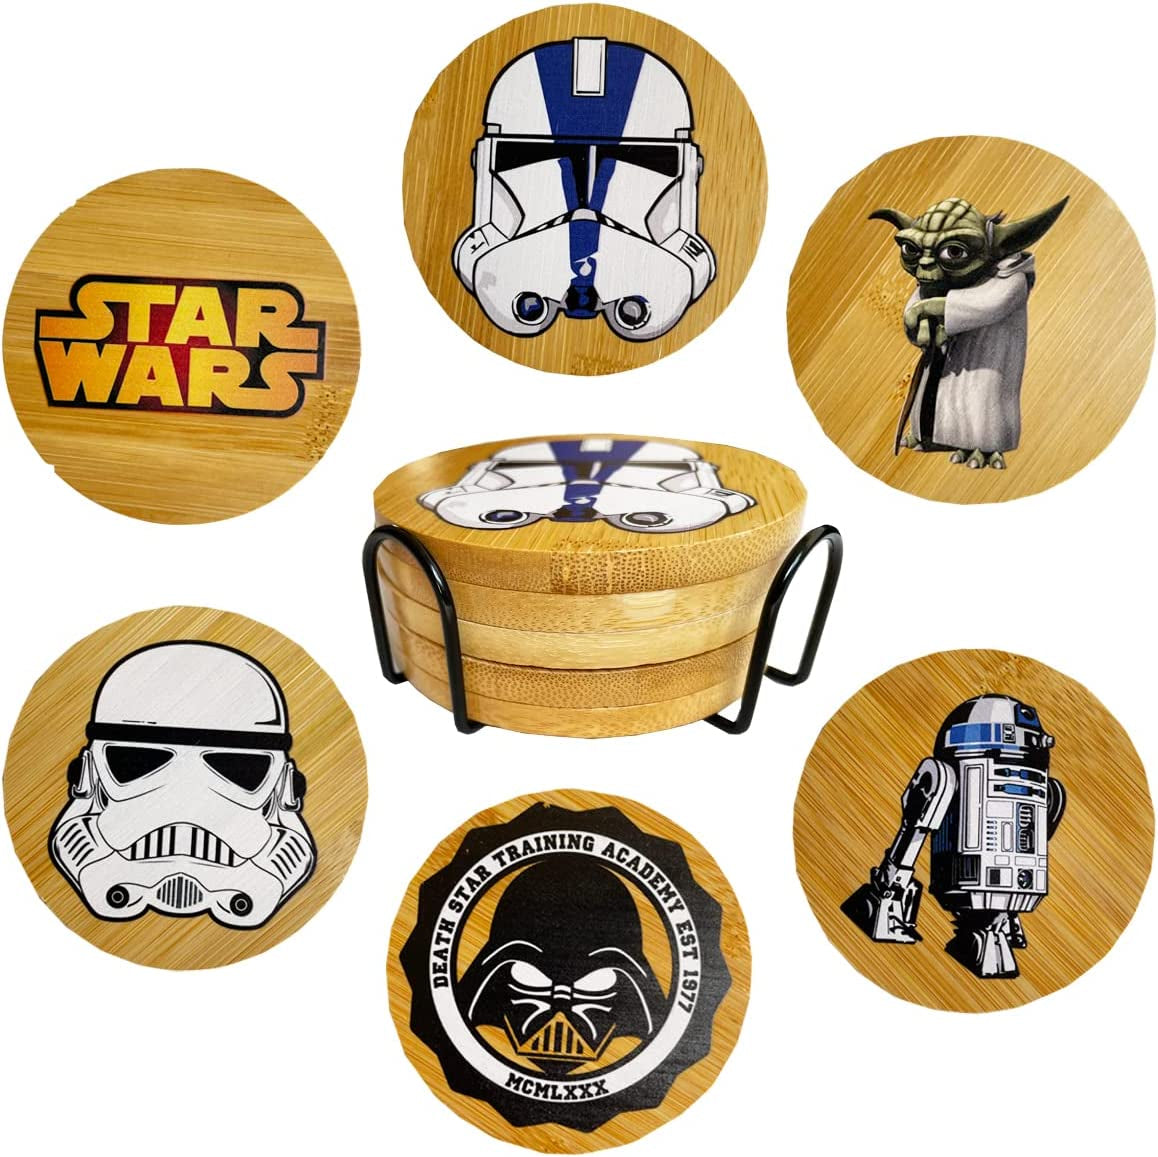 Star War Coasters for Drinks,6 PCS Funny Coasters Set with Coaster Holder,Wood Coasters for Coffee Table,Cute Coasters for Home Decor,Star War Merchandise, Star War Gifts